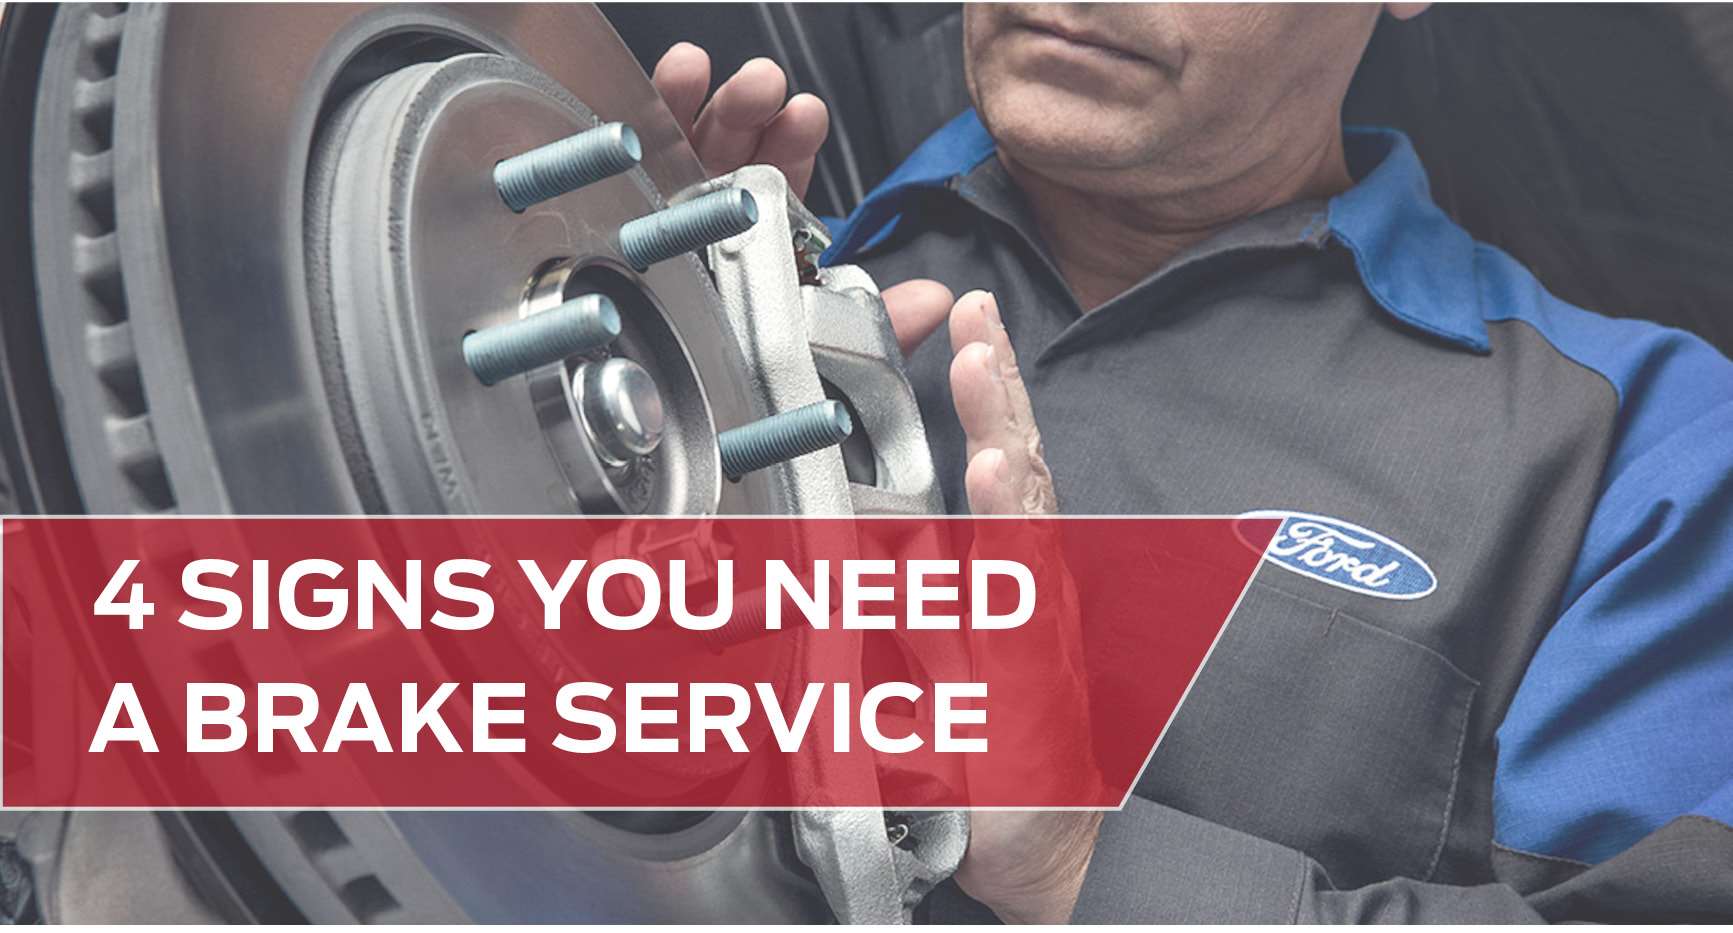 Four signs you need a brake service